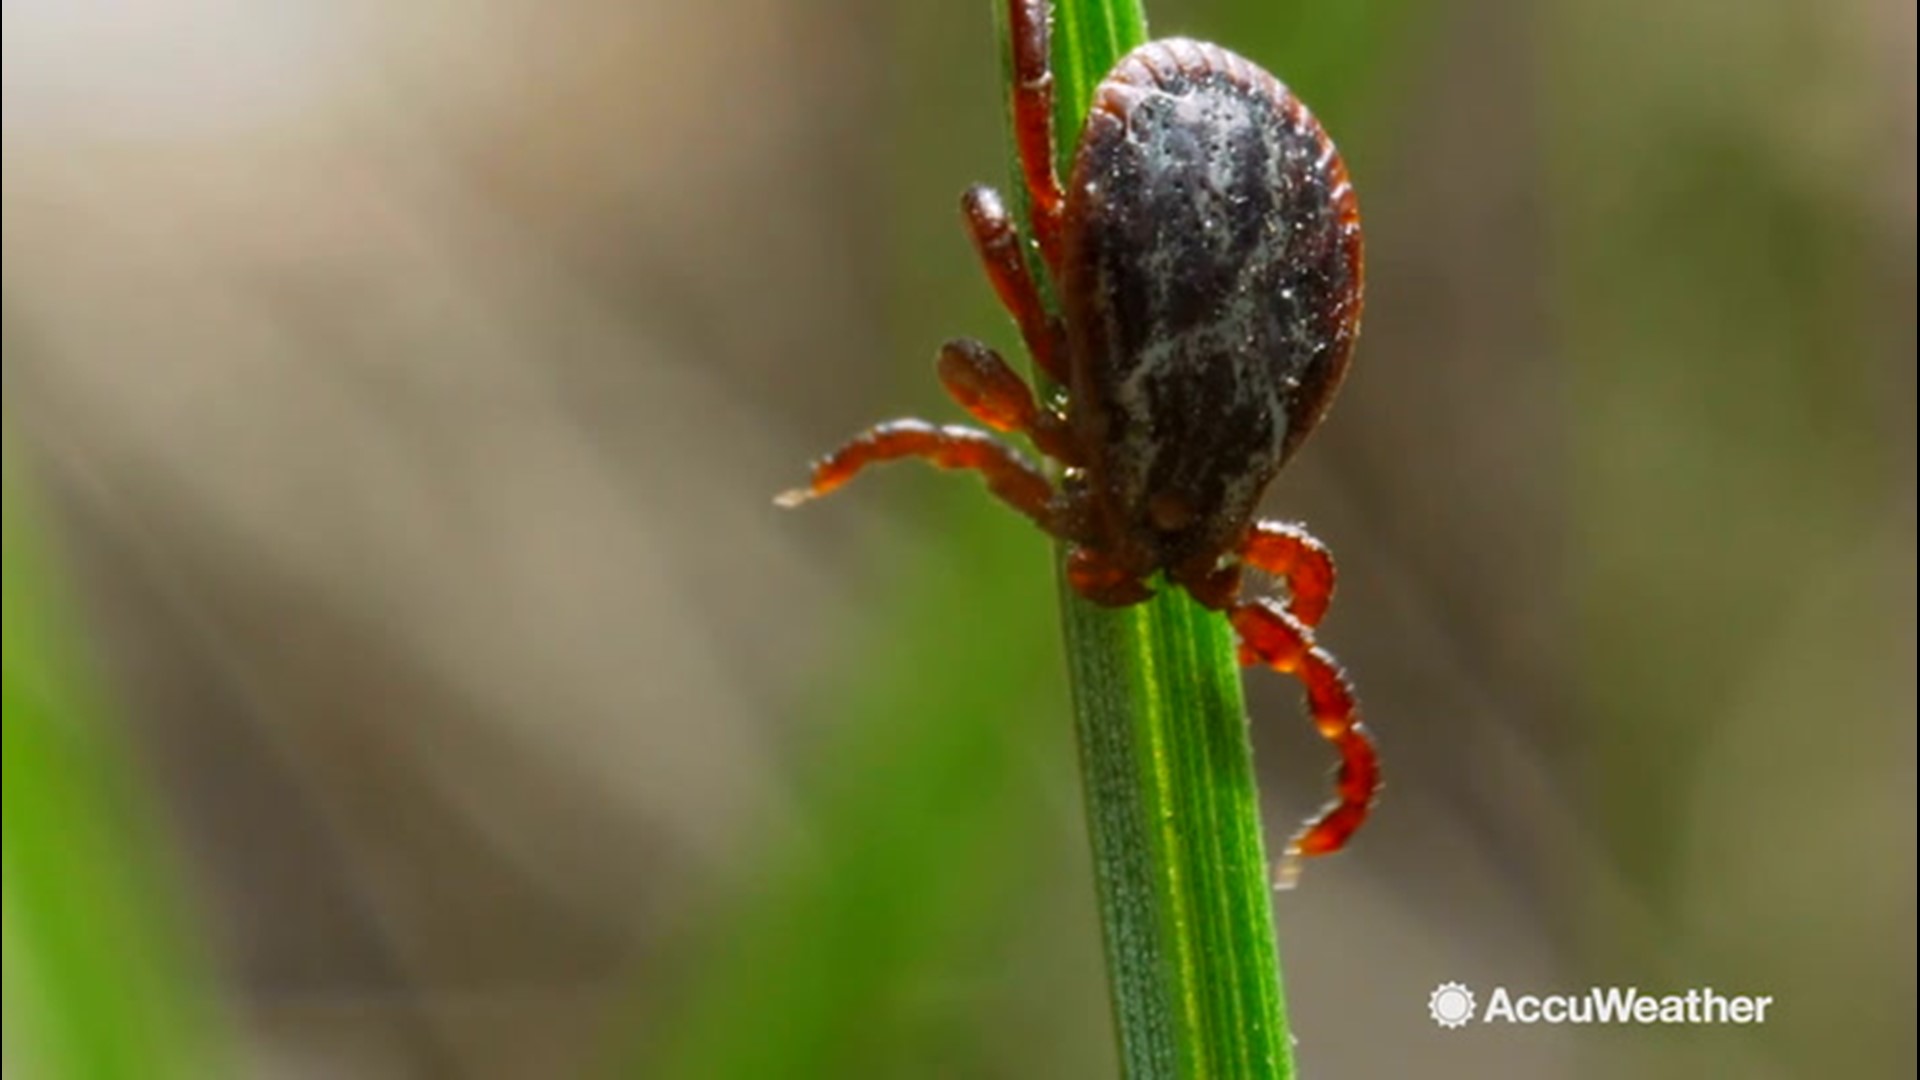 Ticks and the diseases they carry are being helped by a warmer climate, as well as more trees, deer and people. Lyme disease is the most common vector-borne disease carried by ticks, and experts say it's here to stay.